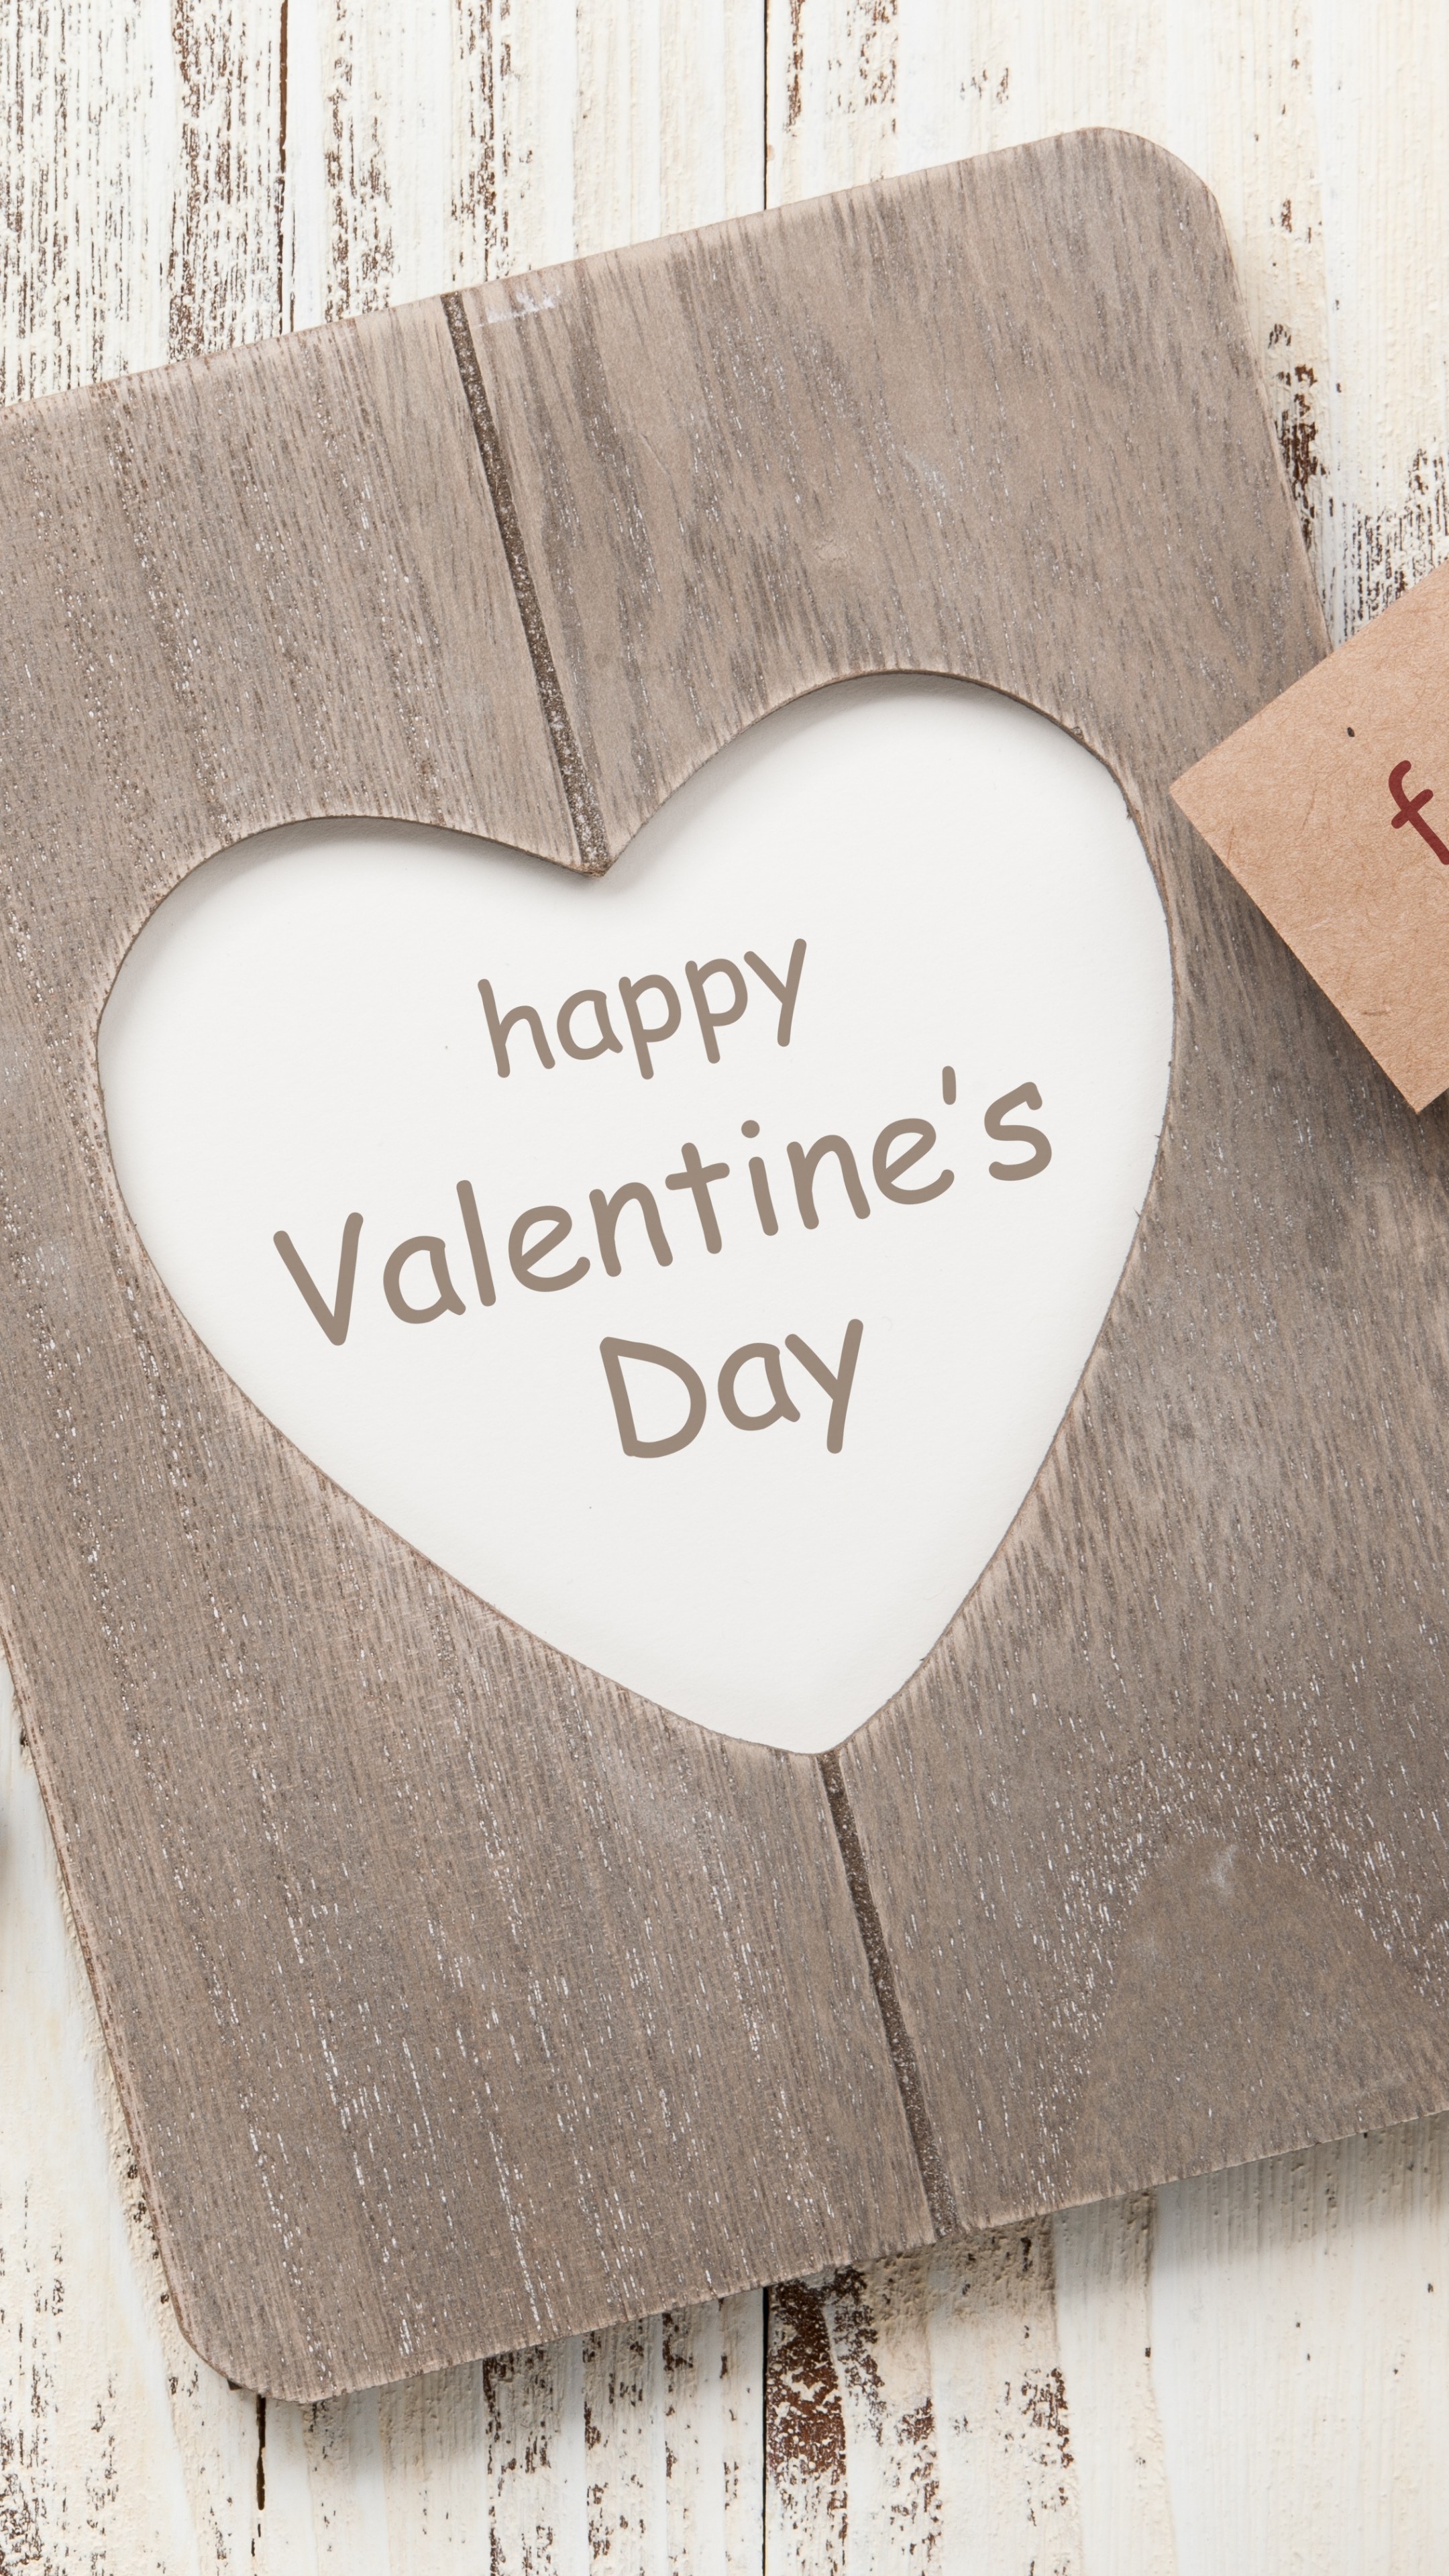 Valentine's Day, Love is in the air, Romantic atmosphere, Heartwarming moments, 2160x3840 4K Handy